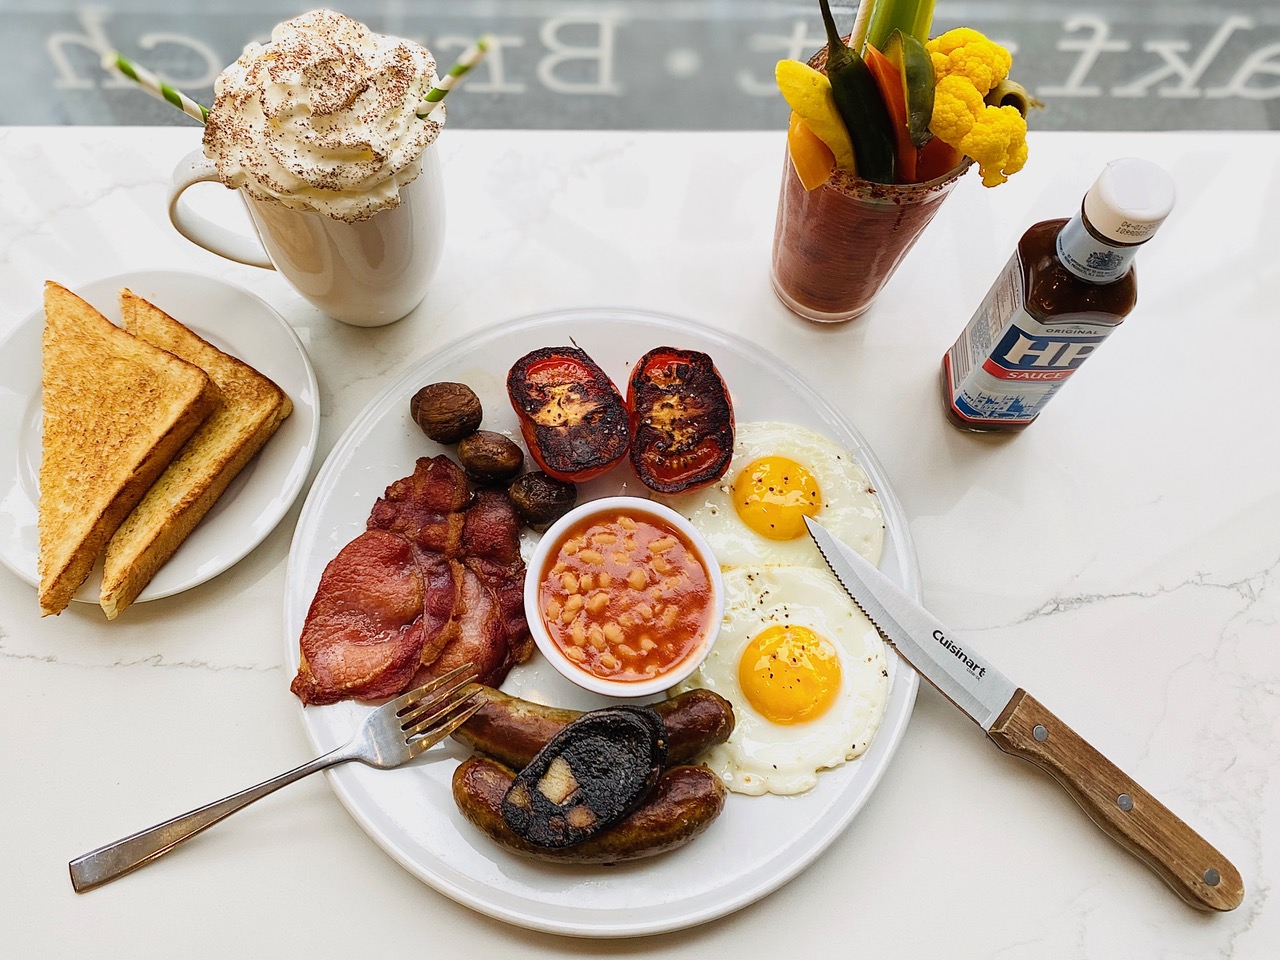 A white plate is packed with a container of beans, two fried eggs, two broiled tomatoes, rashers, black pudding and more, with a side of toast. This is the Full English at Kingsland Kitchen.